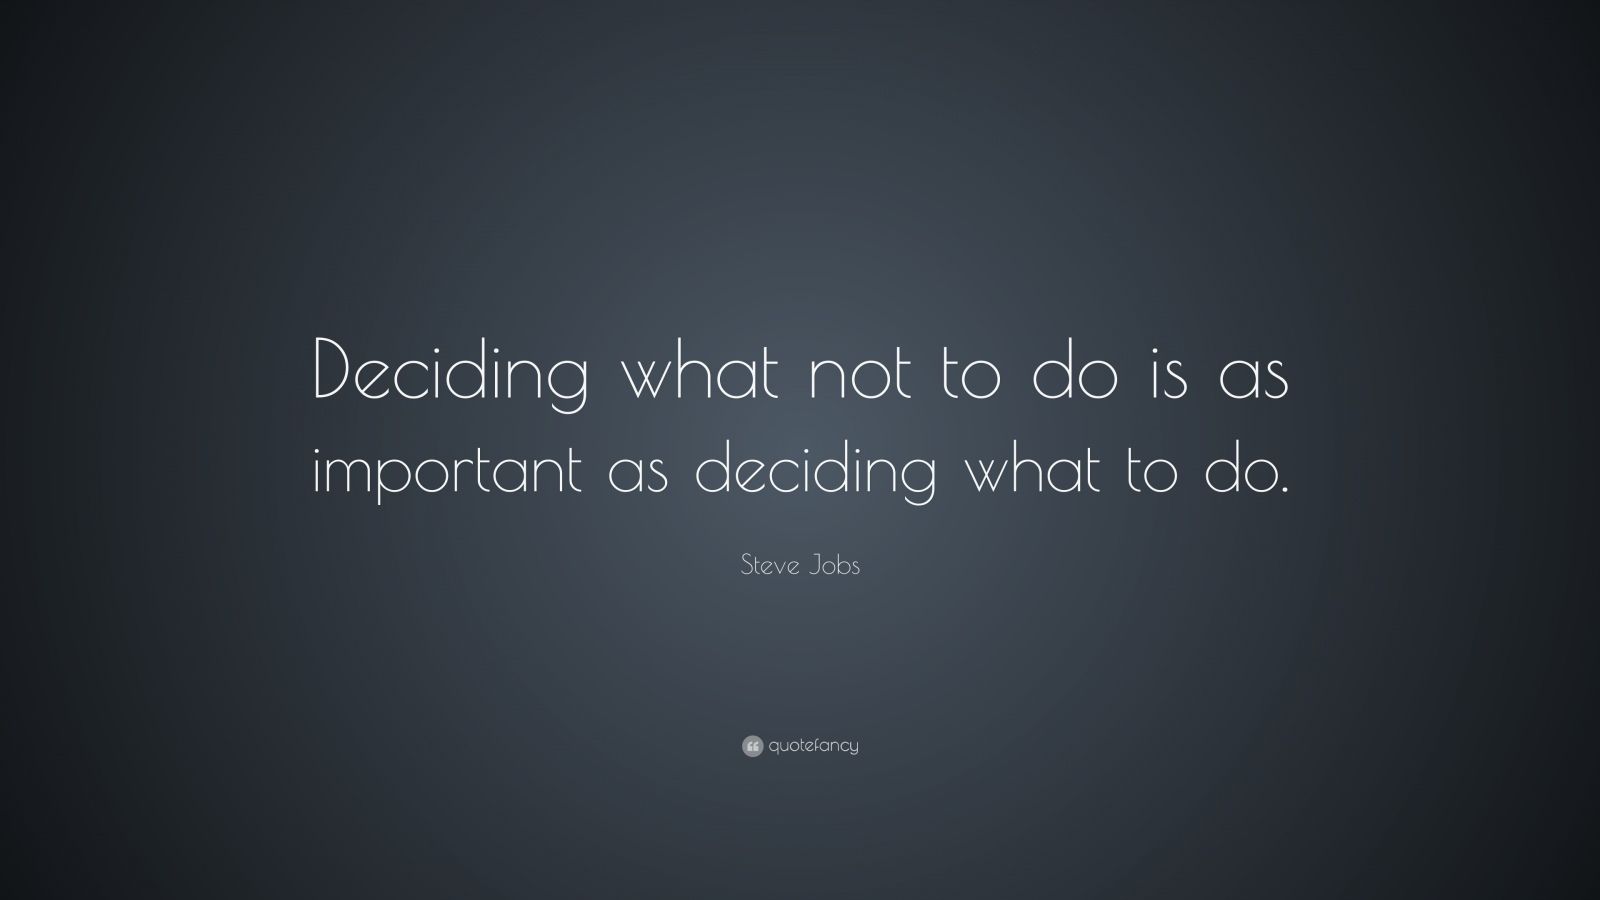 Steve Jobs Quote: “Deciding what not to do is as important as